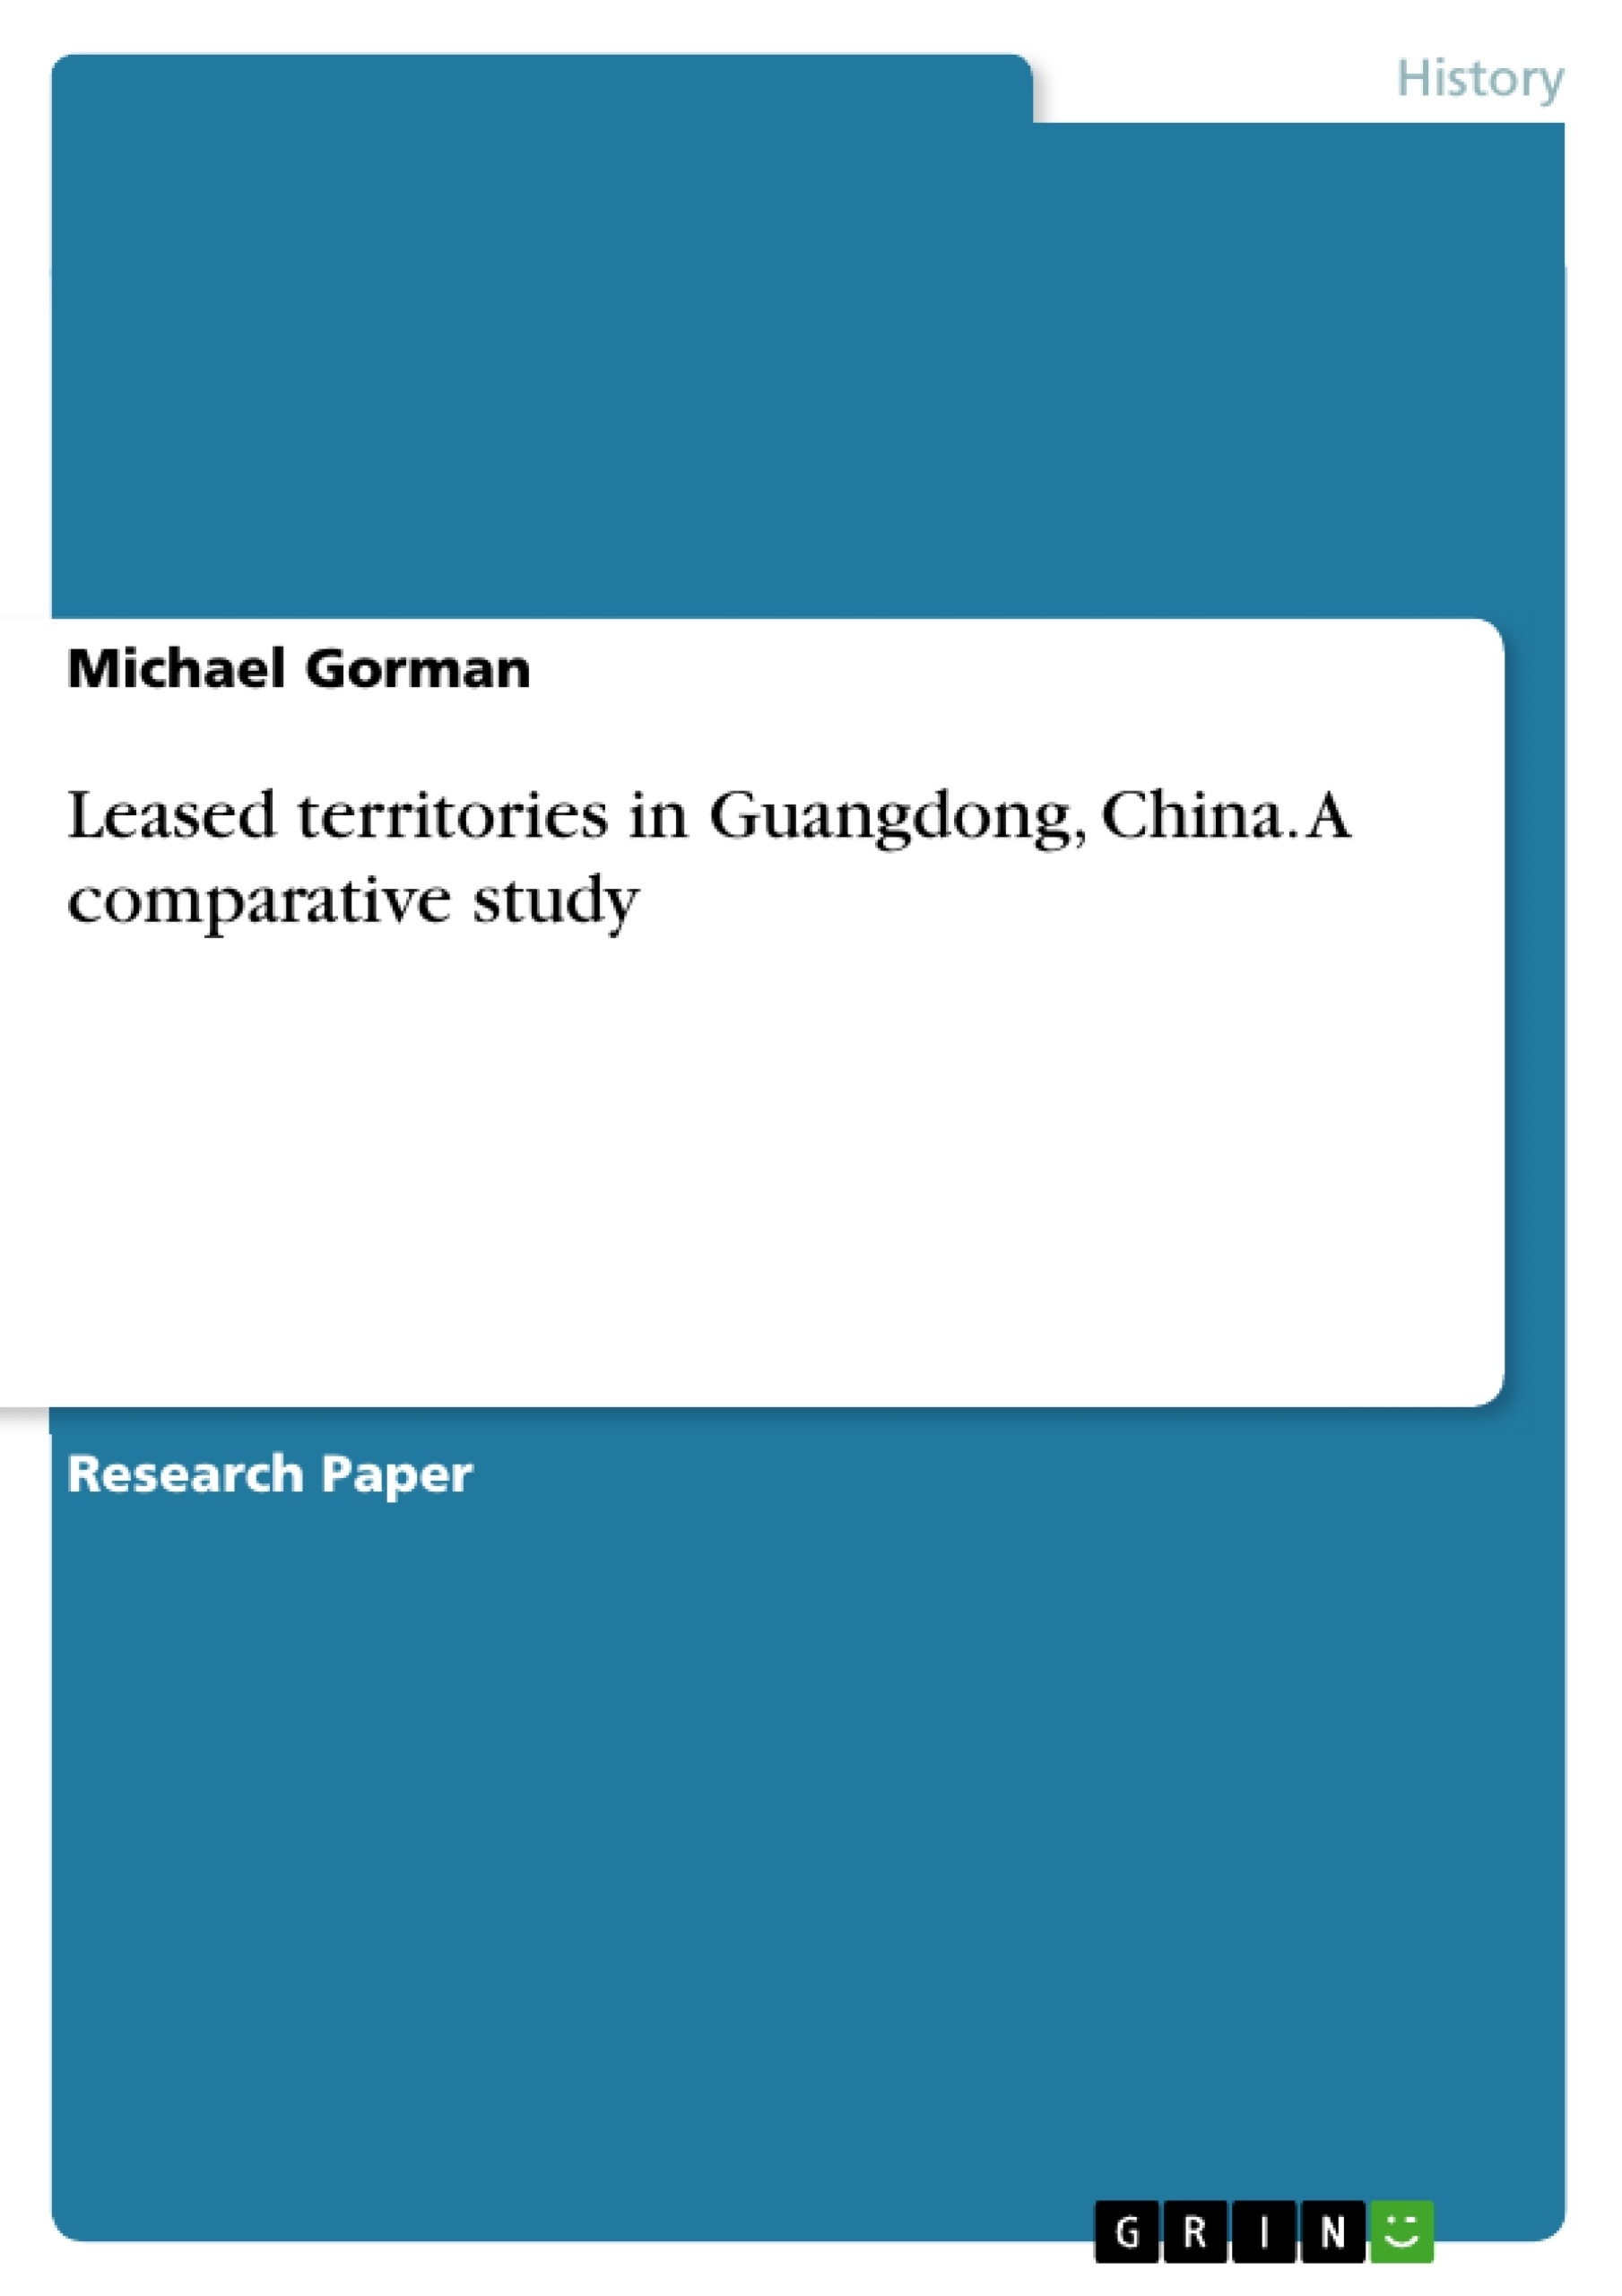 Título: Leased territories in Guangdong, China. A comparative study